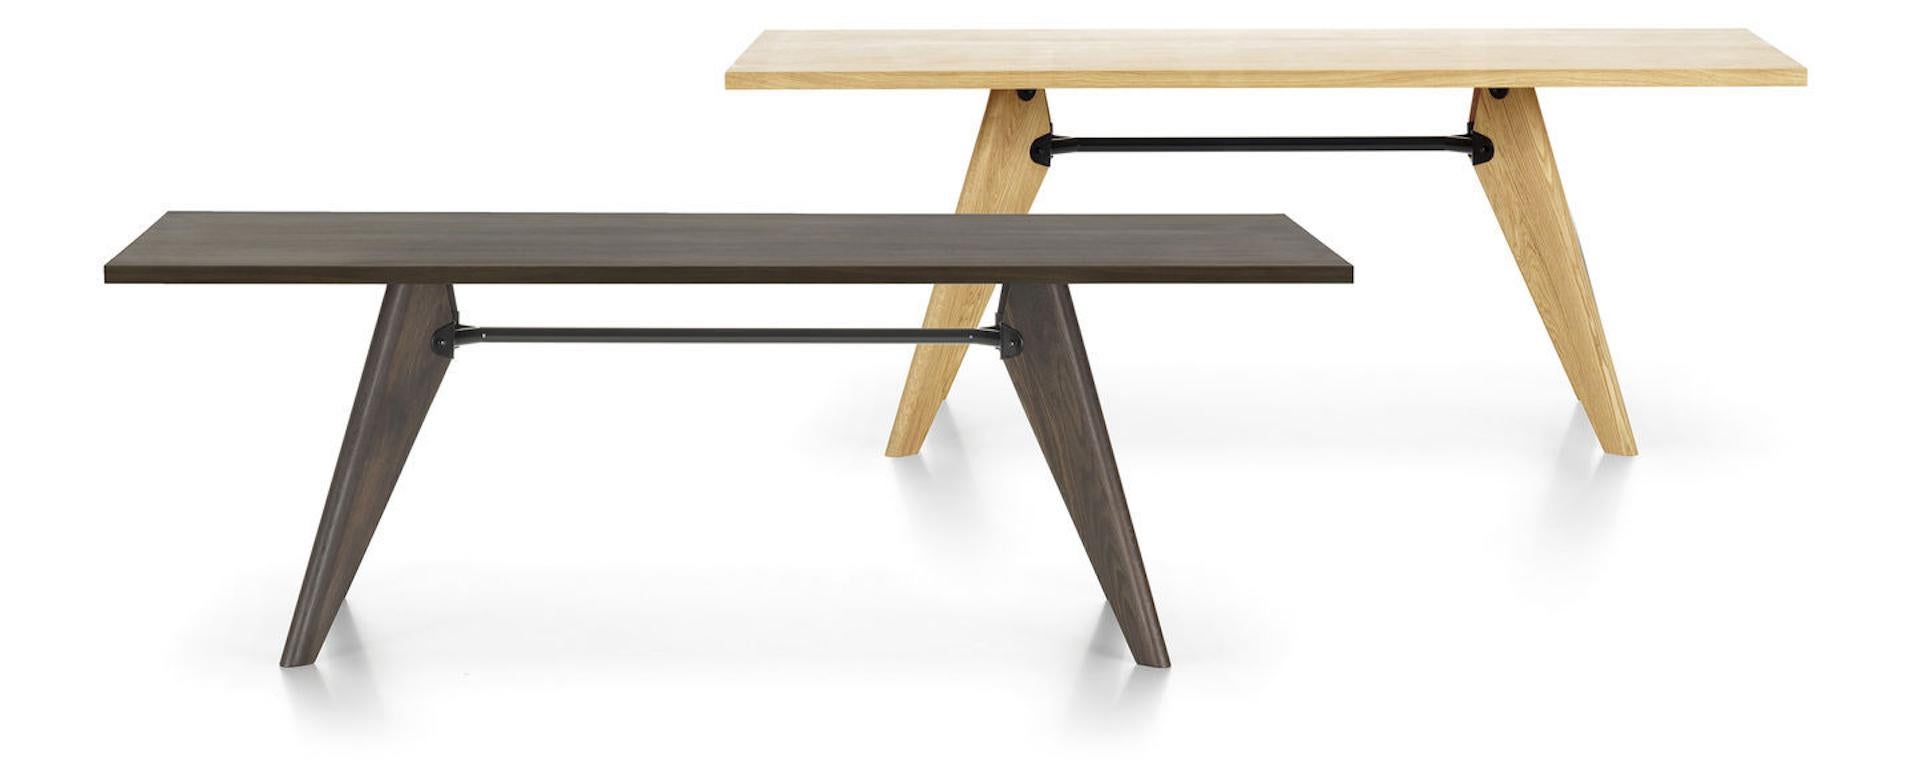 Steel Large Jean Prouvé Table Solvay in American Walnut for Vitra